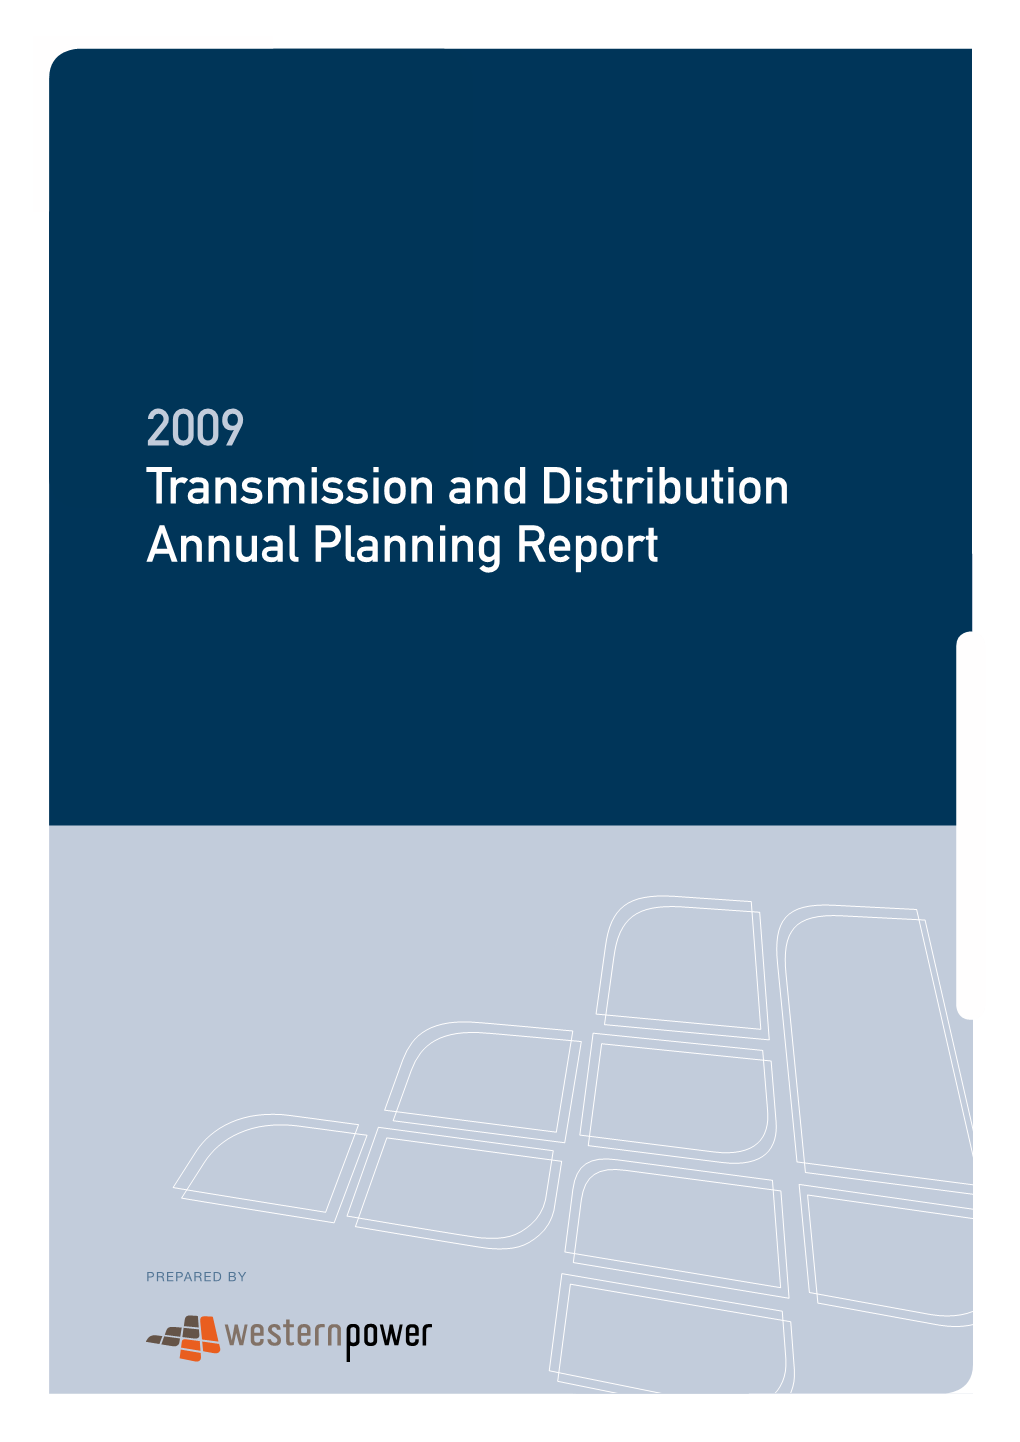 Annual Planning Report 2009